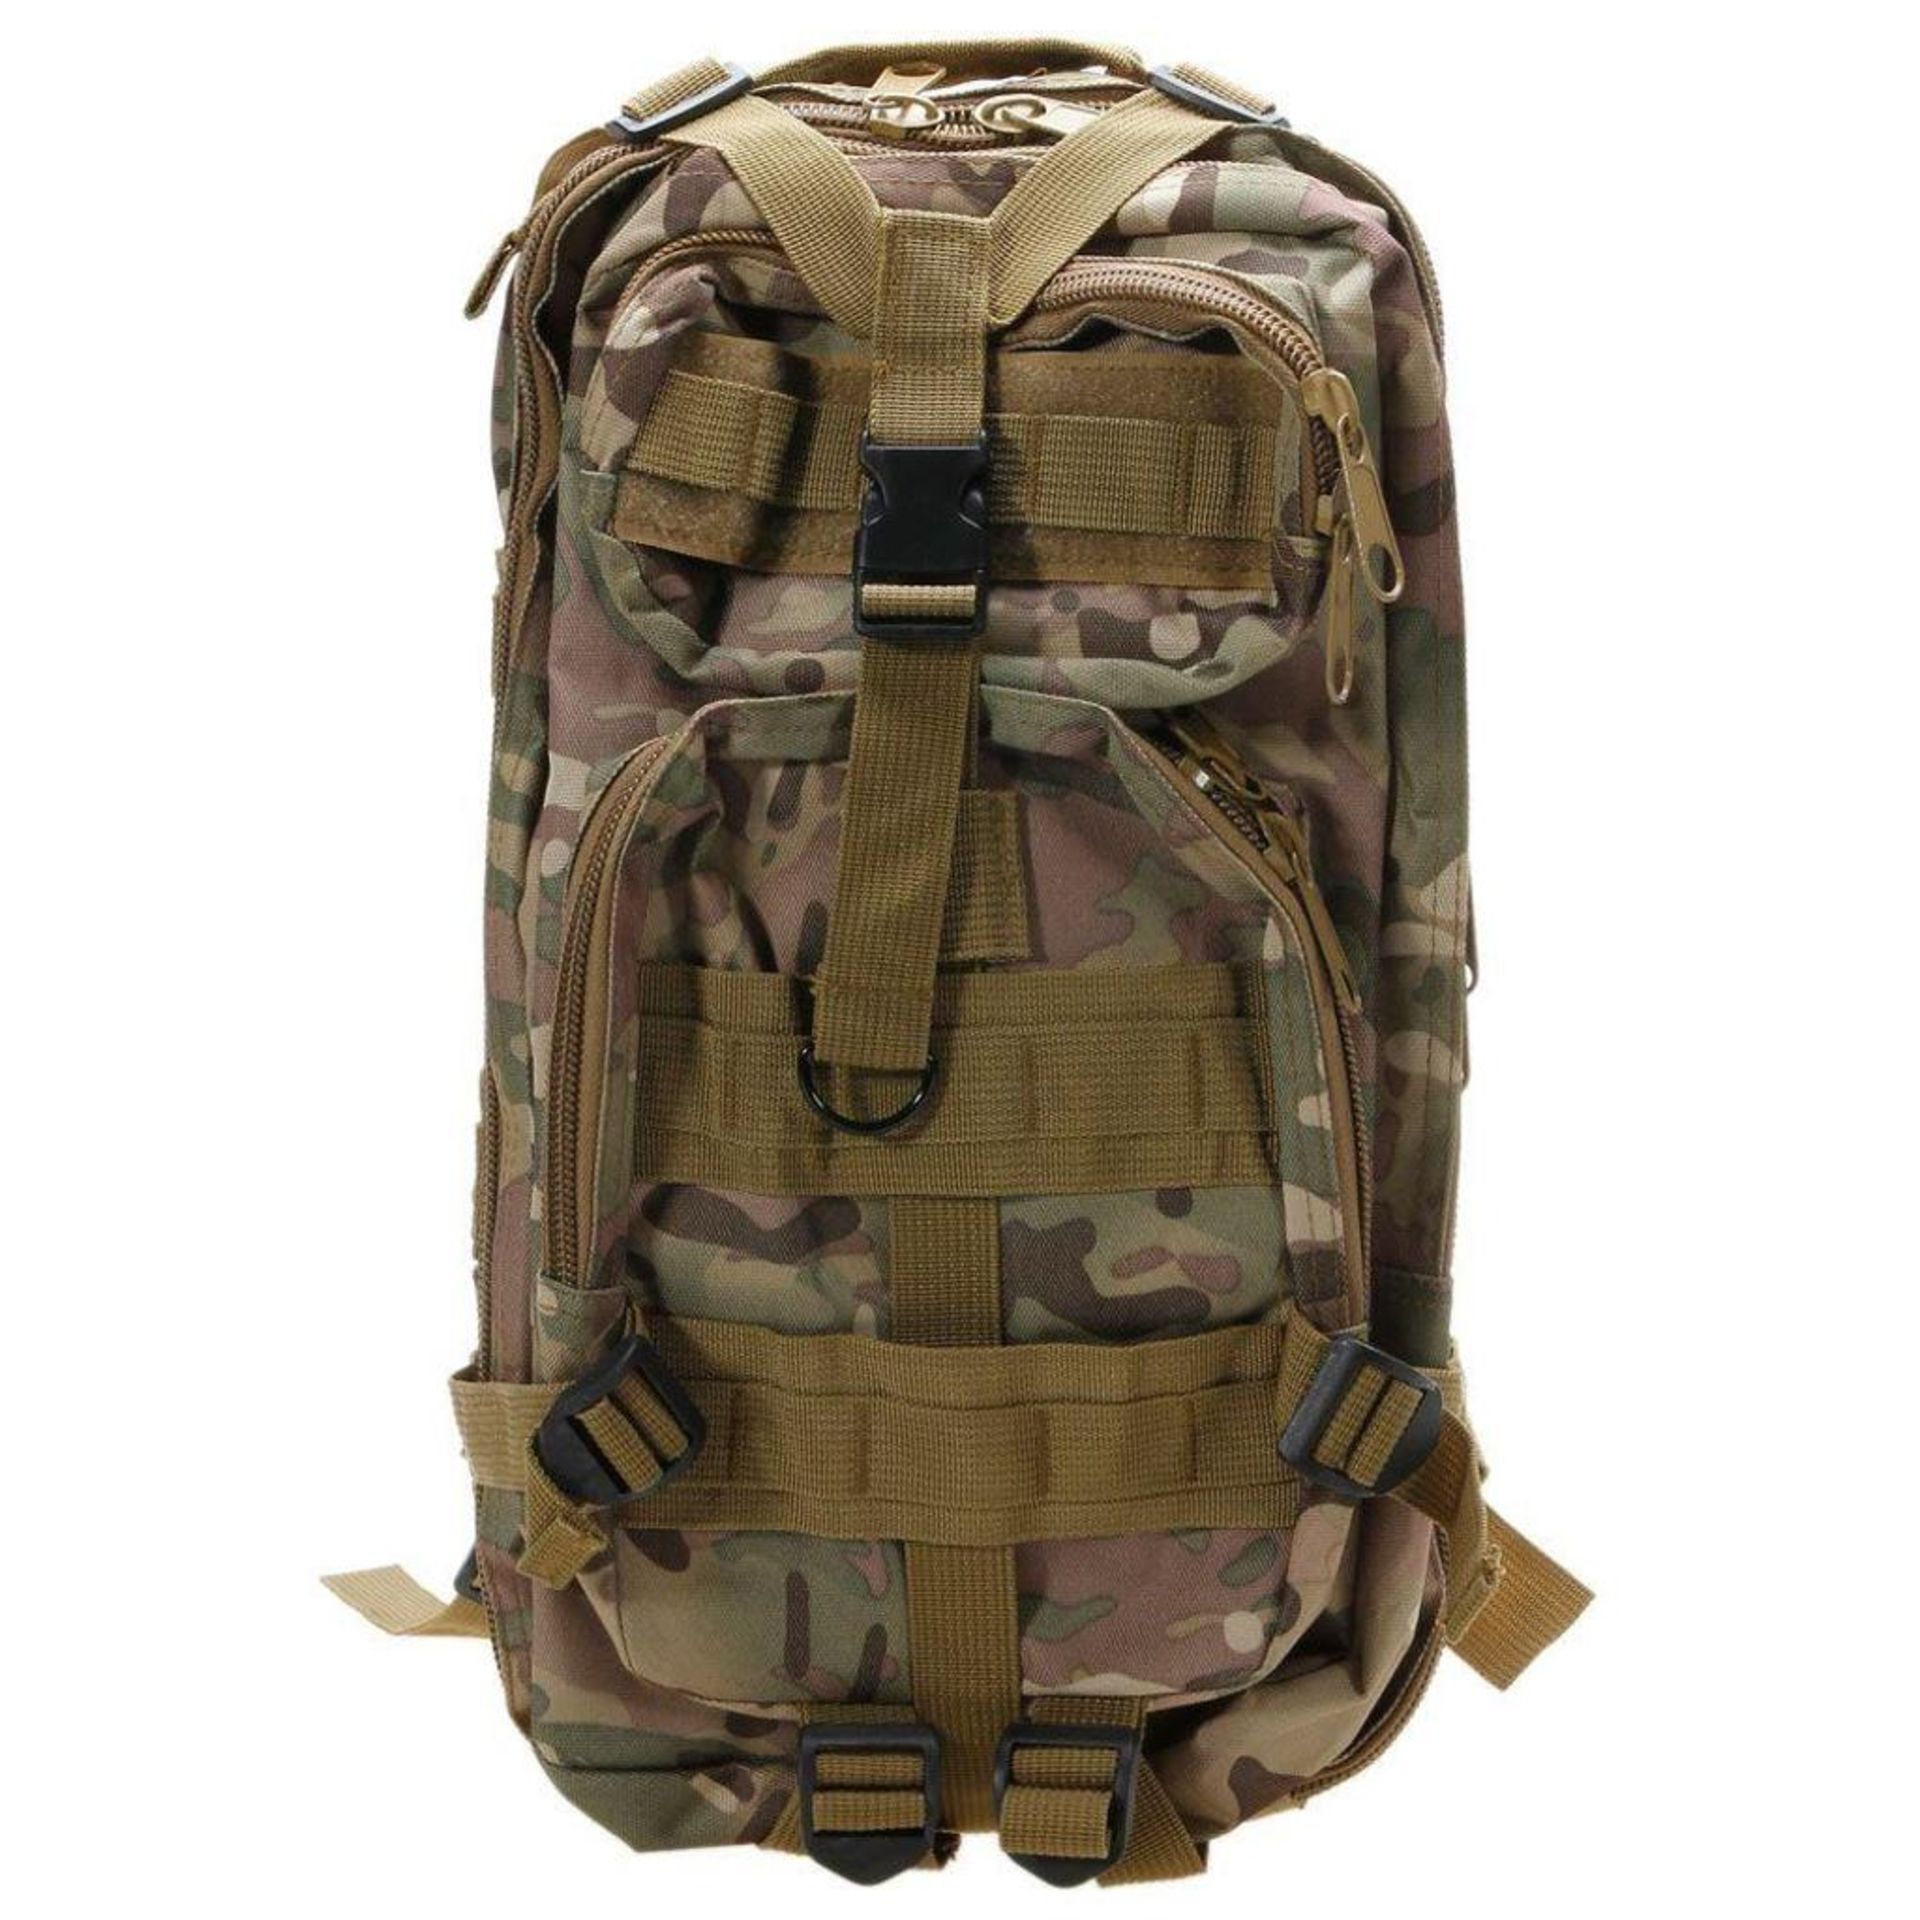 NEW Outdoor Neutral Adjustable Military Tactic Backpack, Color: Multicam